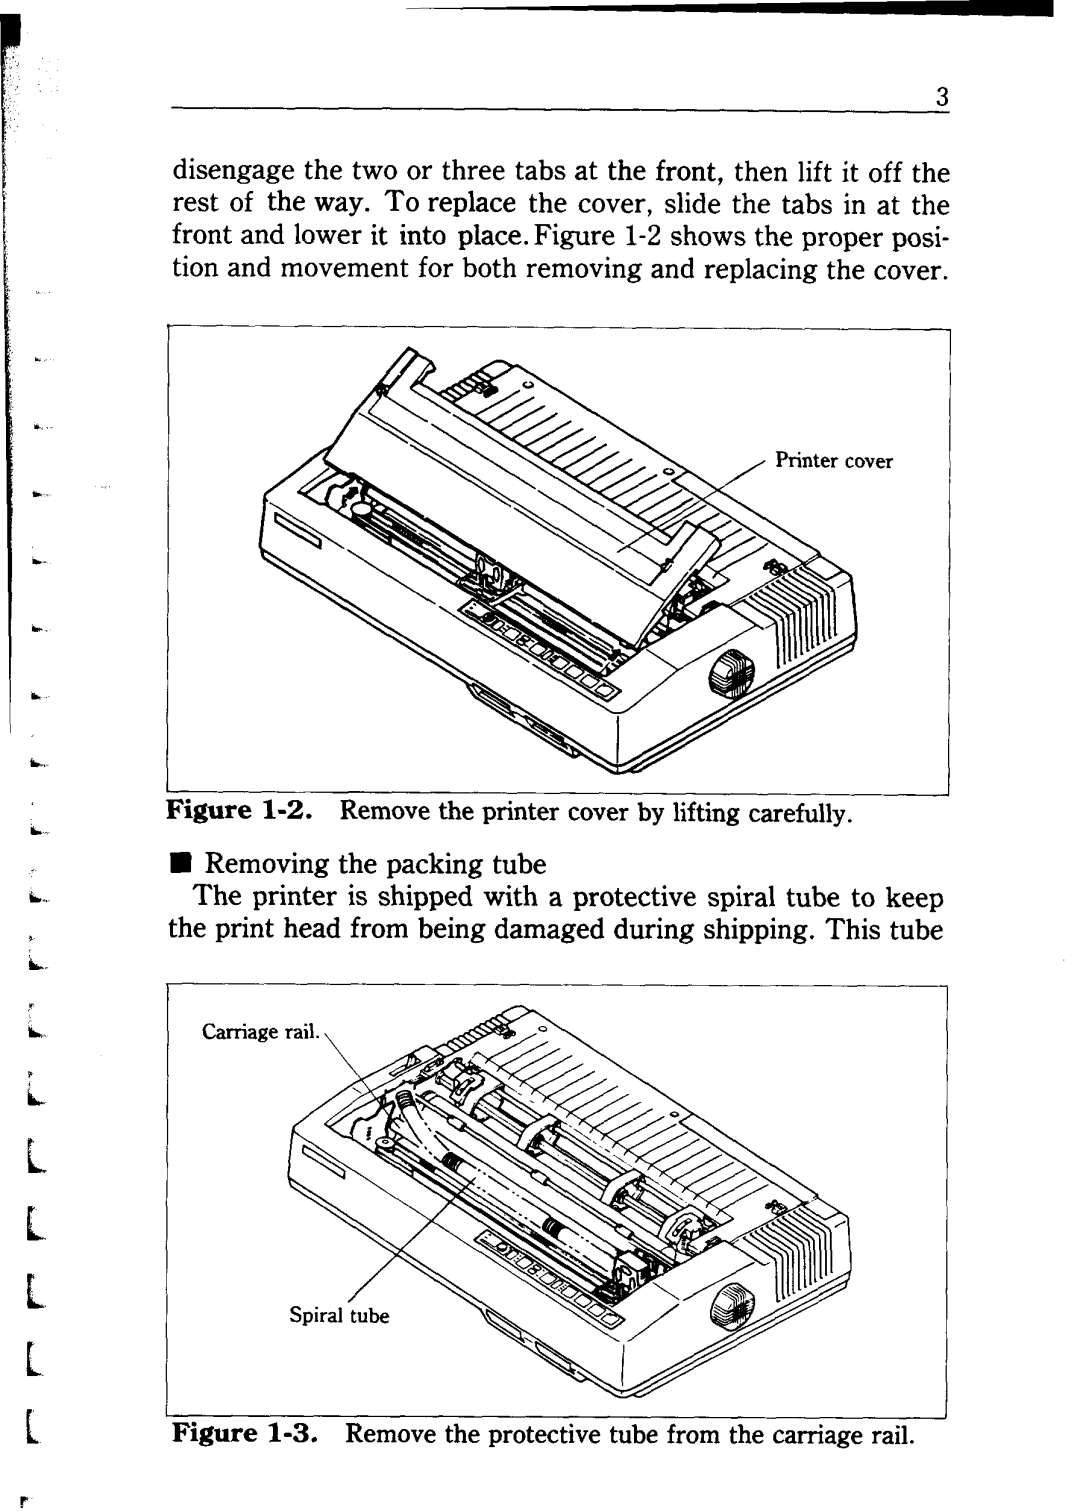 Star Micronics NB24-10/15 user manual 2. Remove the printer cover by lifting carefully 